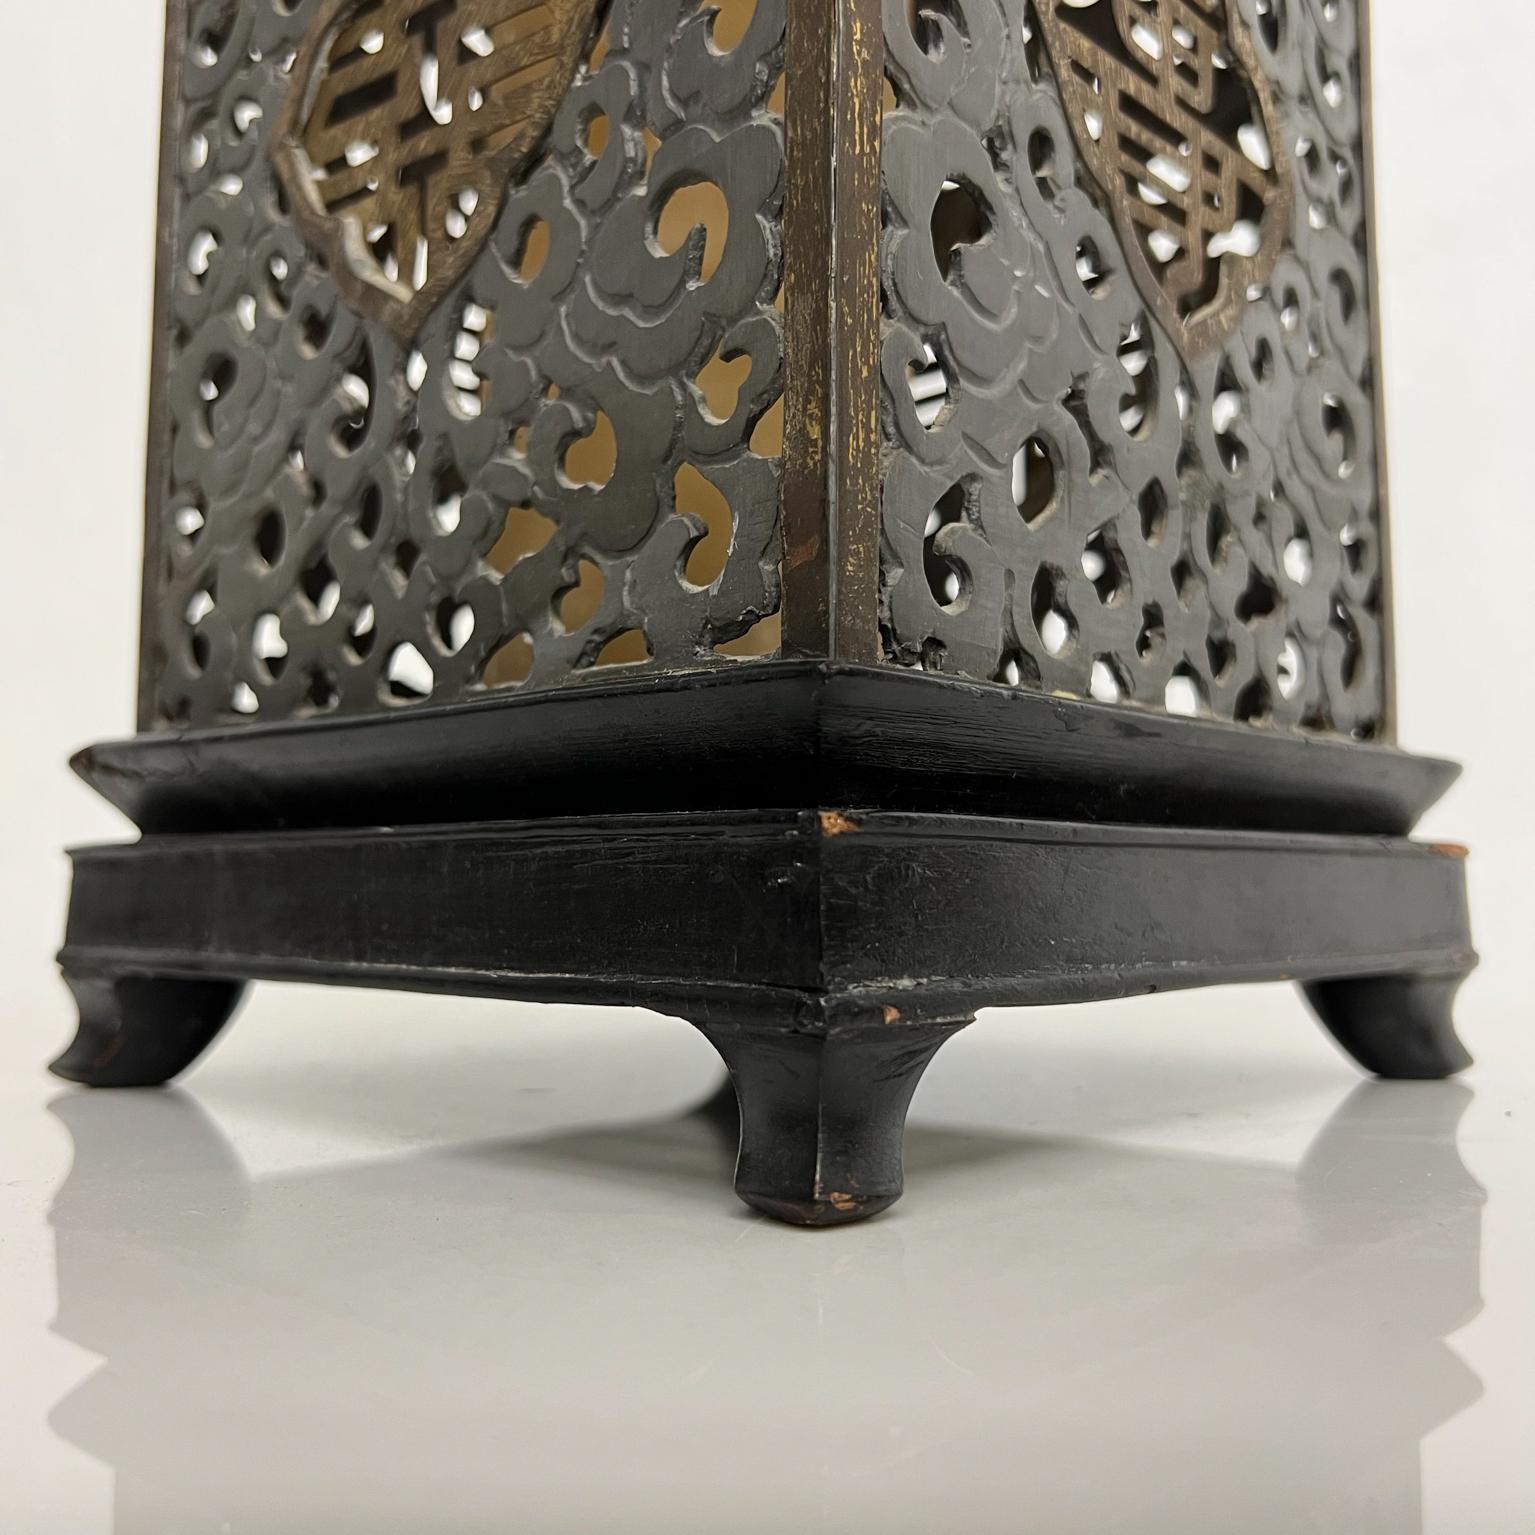 1950s Chinese Tall Lantern Candle Holder Incense Burner in Sculptural Cut Brass For Sale 1